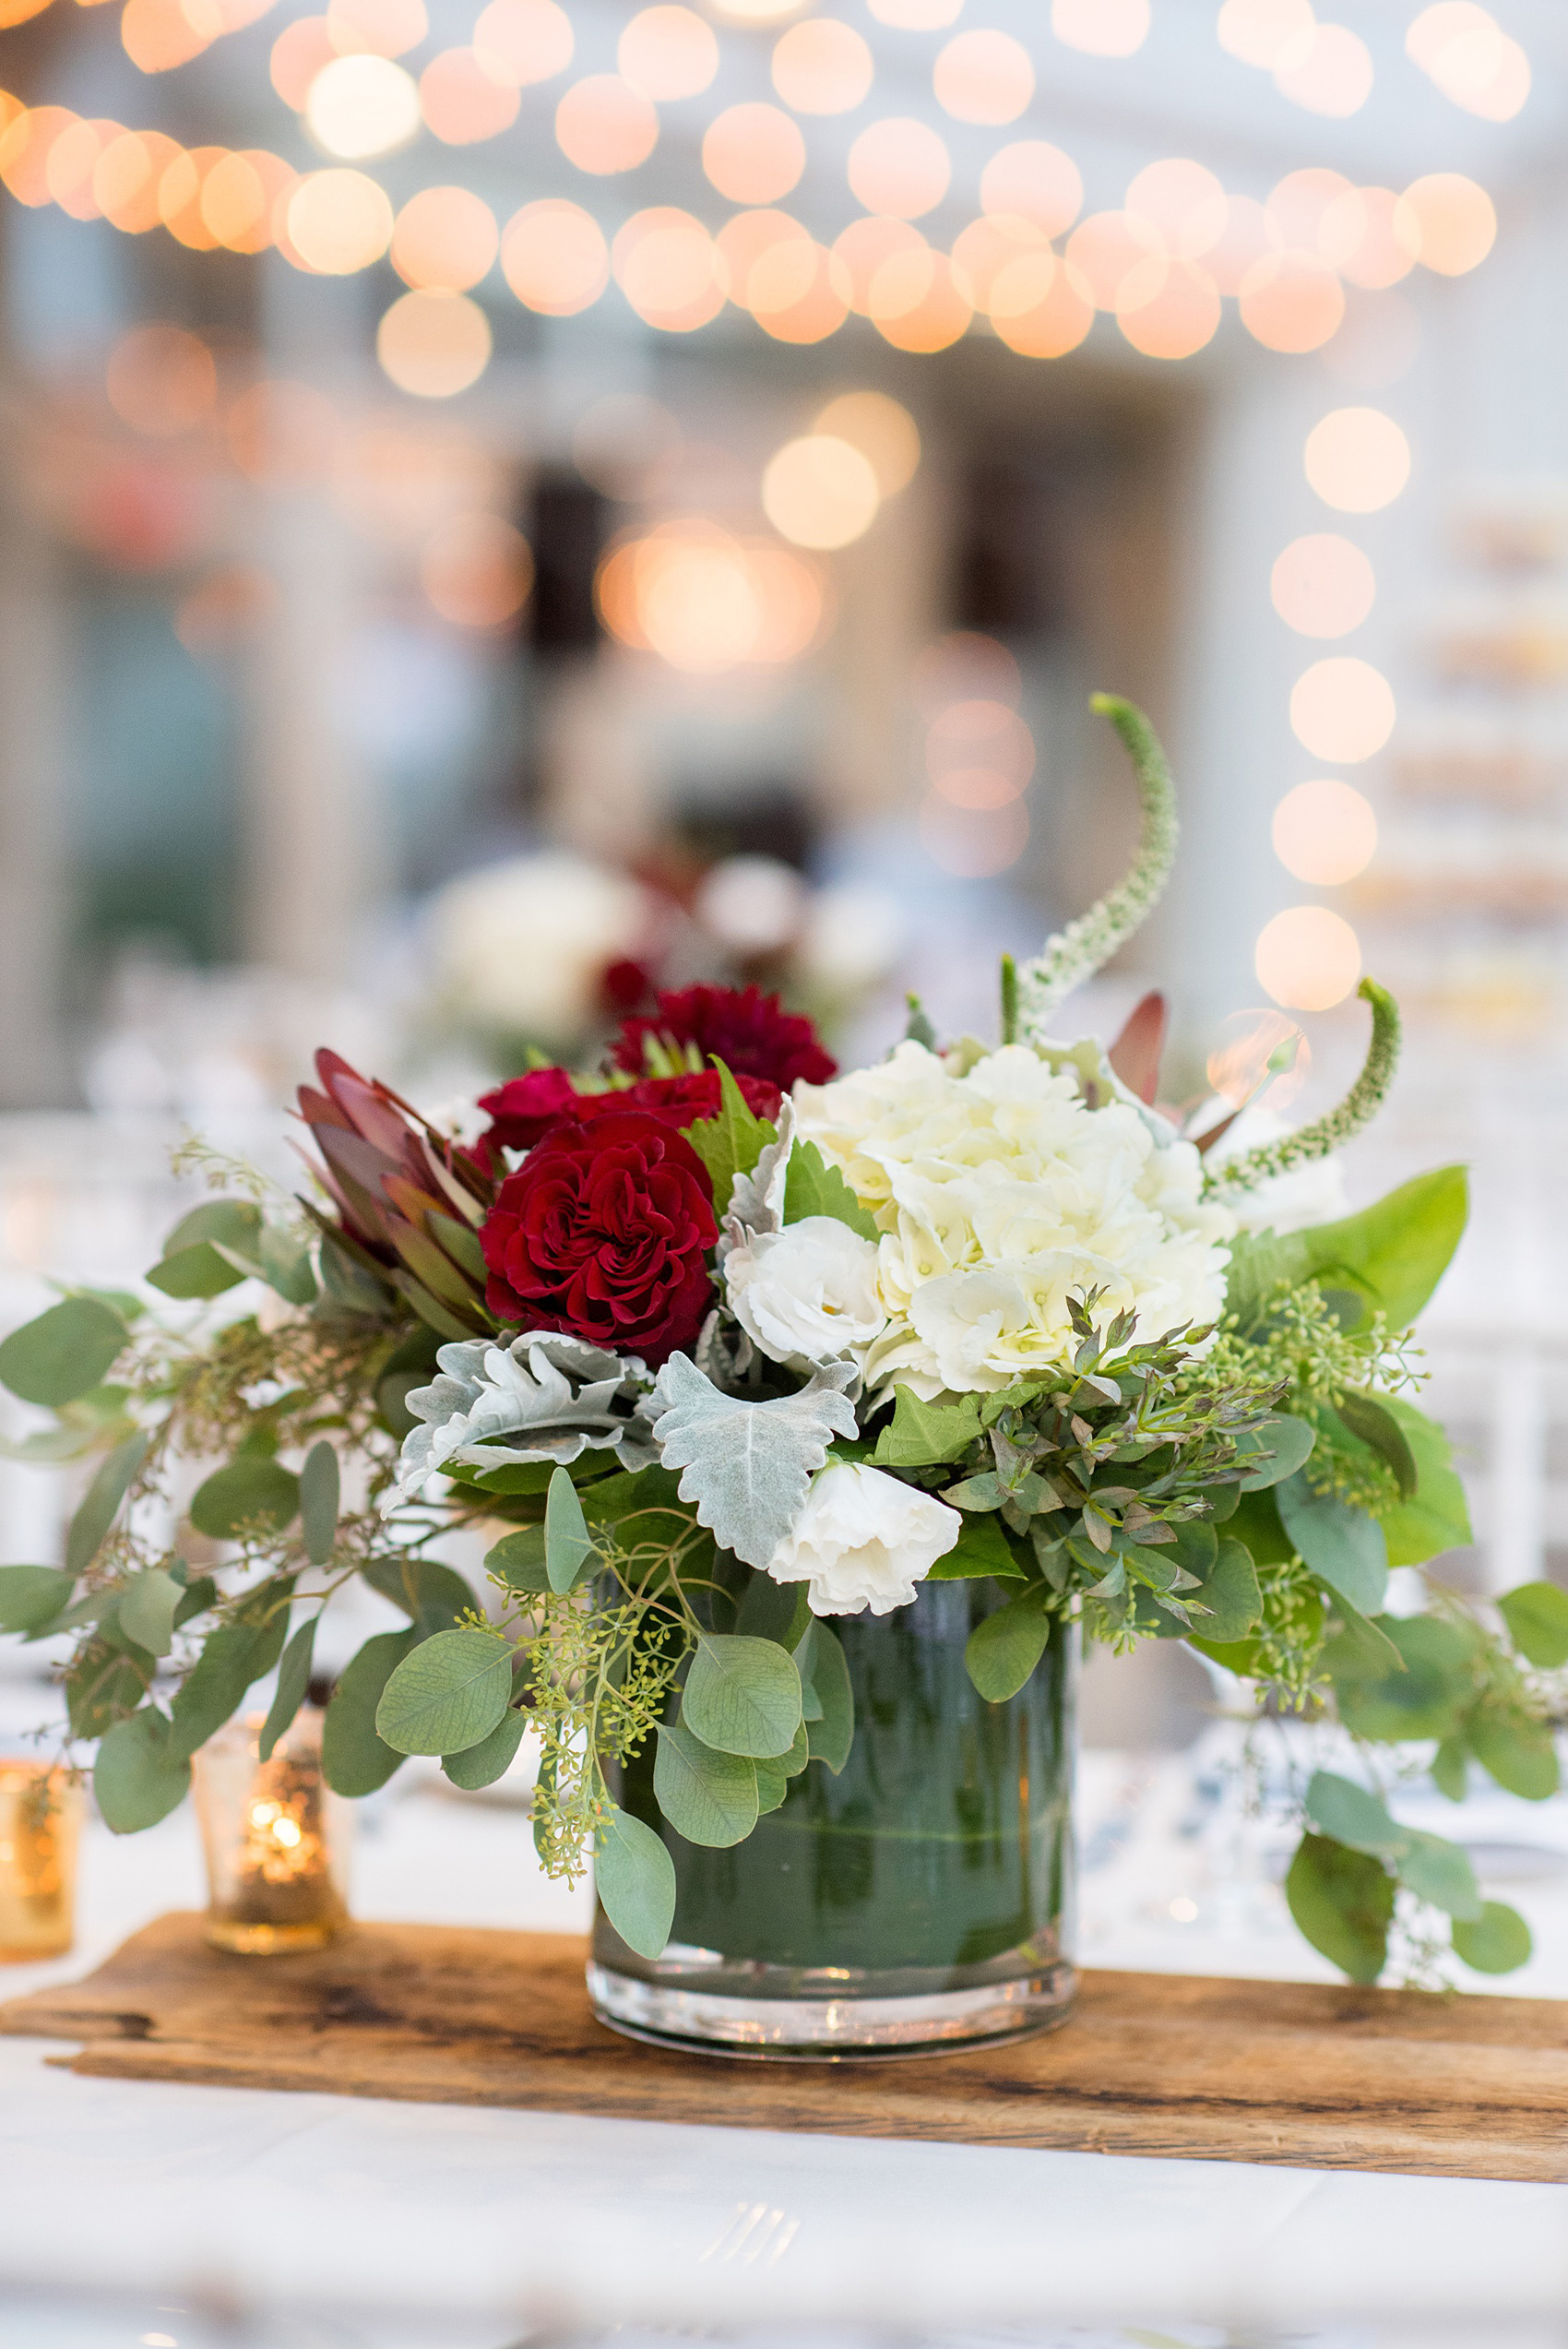 Wedding photos at Crabtree's Kittle House in Chappaqua, New York by Mikkel Paige Photography. The indoor reception was in a historic home, close to NYC in Westchester county. The red and white floral centerpieces were placed under twinkle market lights. Click through for more reception inspiration from this beautiful summer wedding! #mikkelpaige #CrabtreesKittleHouse #WestchesterWeddingVenues #WestchesterWedding #summerwedding #redandwhiteflowercenterpieces #redandwhiteflowers #marketlights